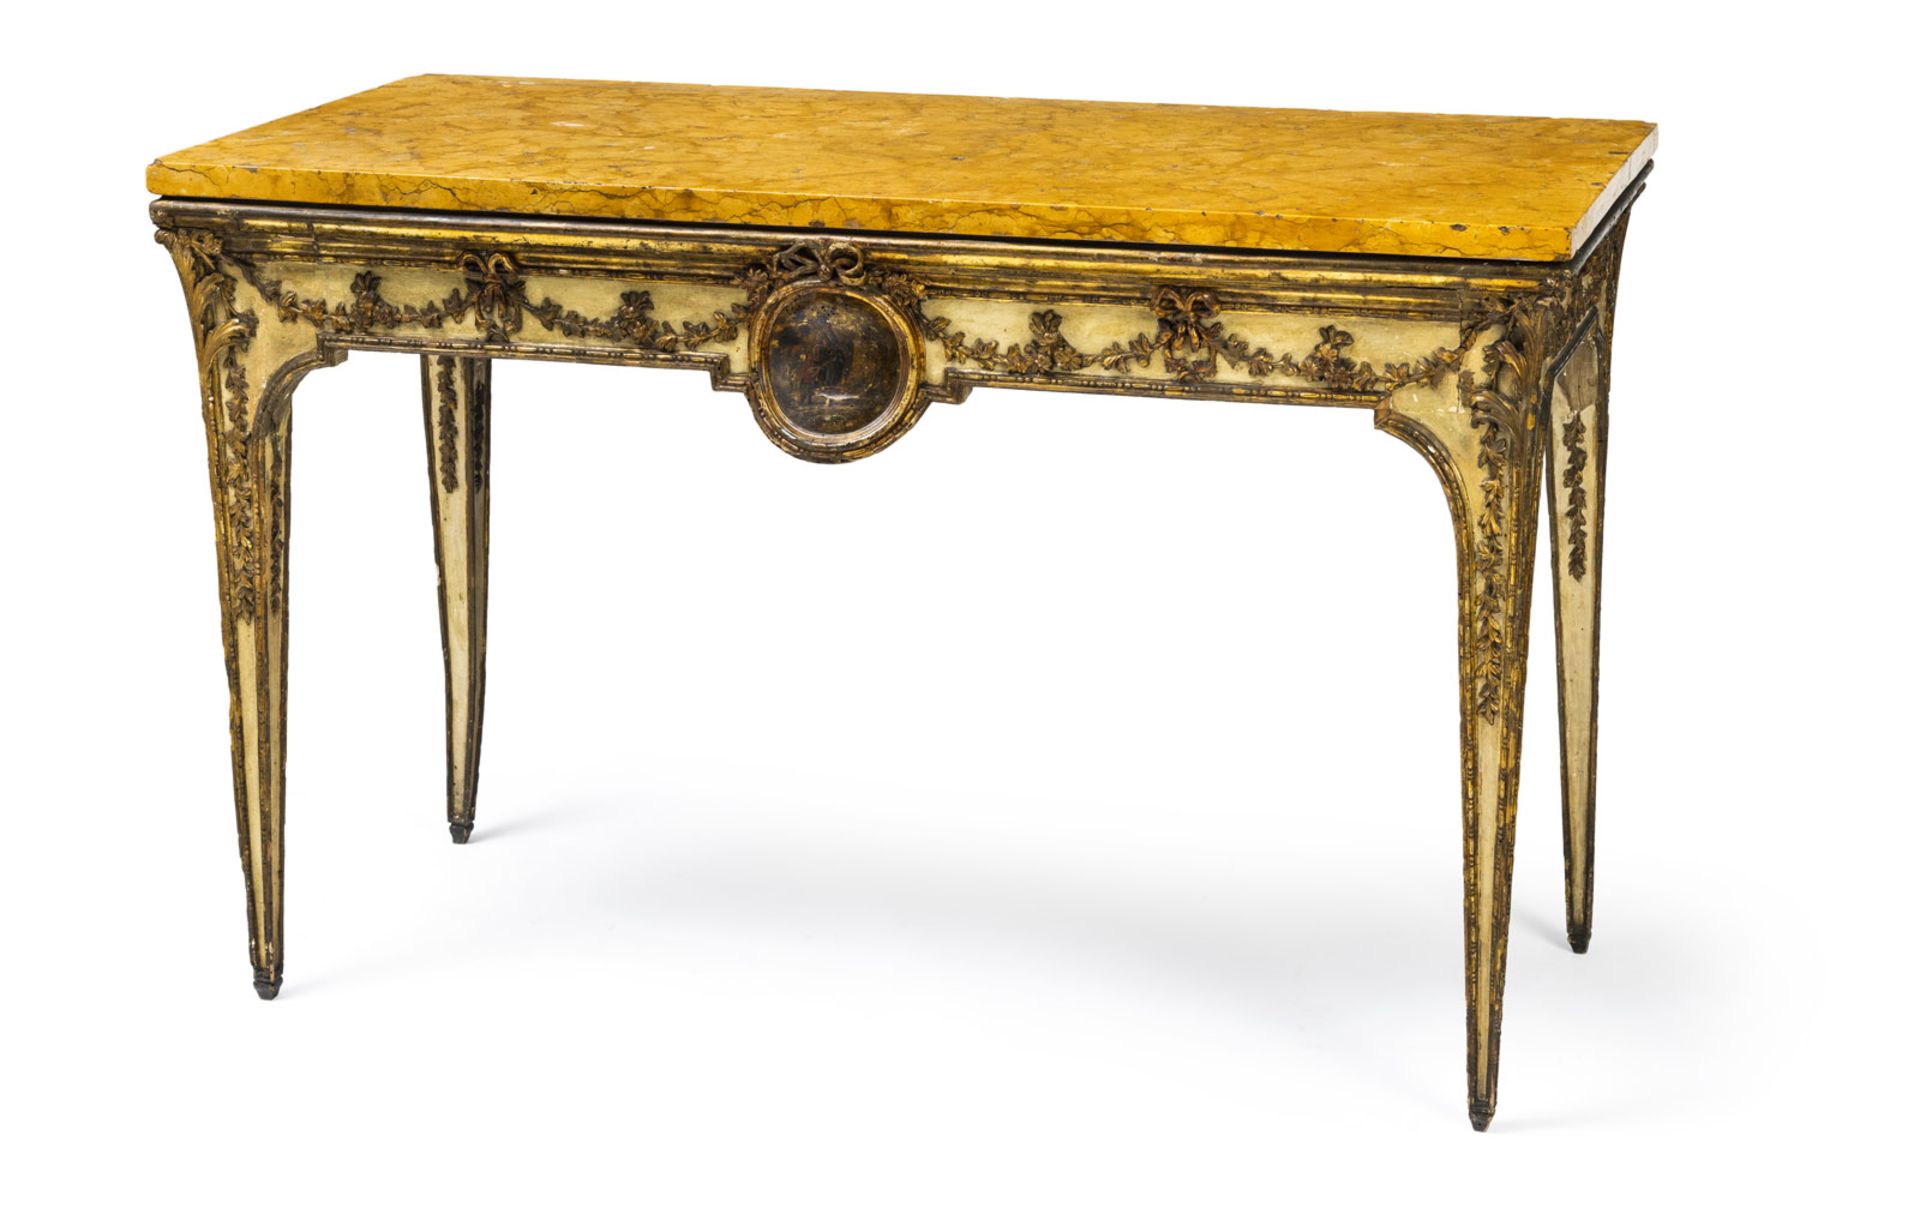 A TRANSITION PERIOD PAINED AND PARTLY SILVERED CONSOLE TABLE